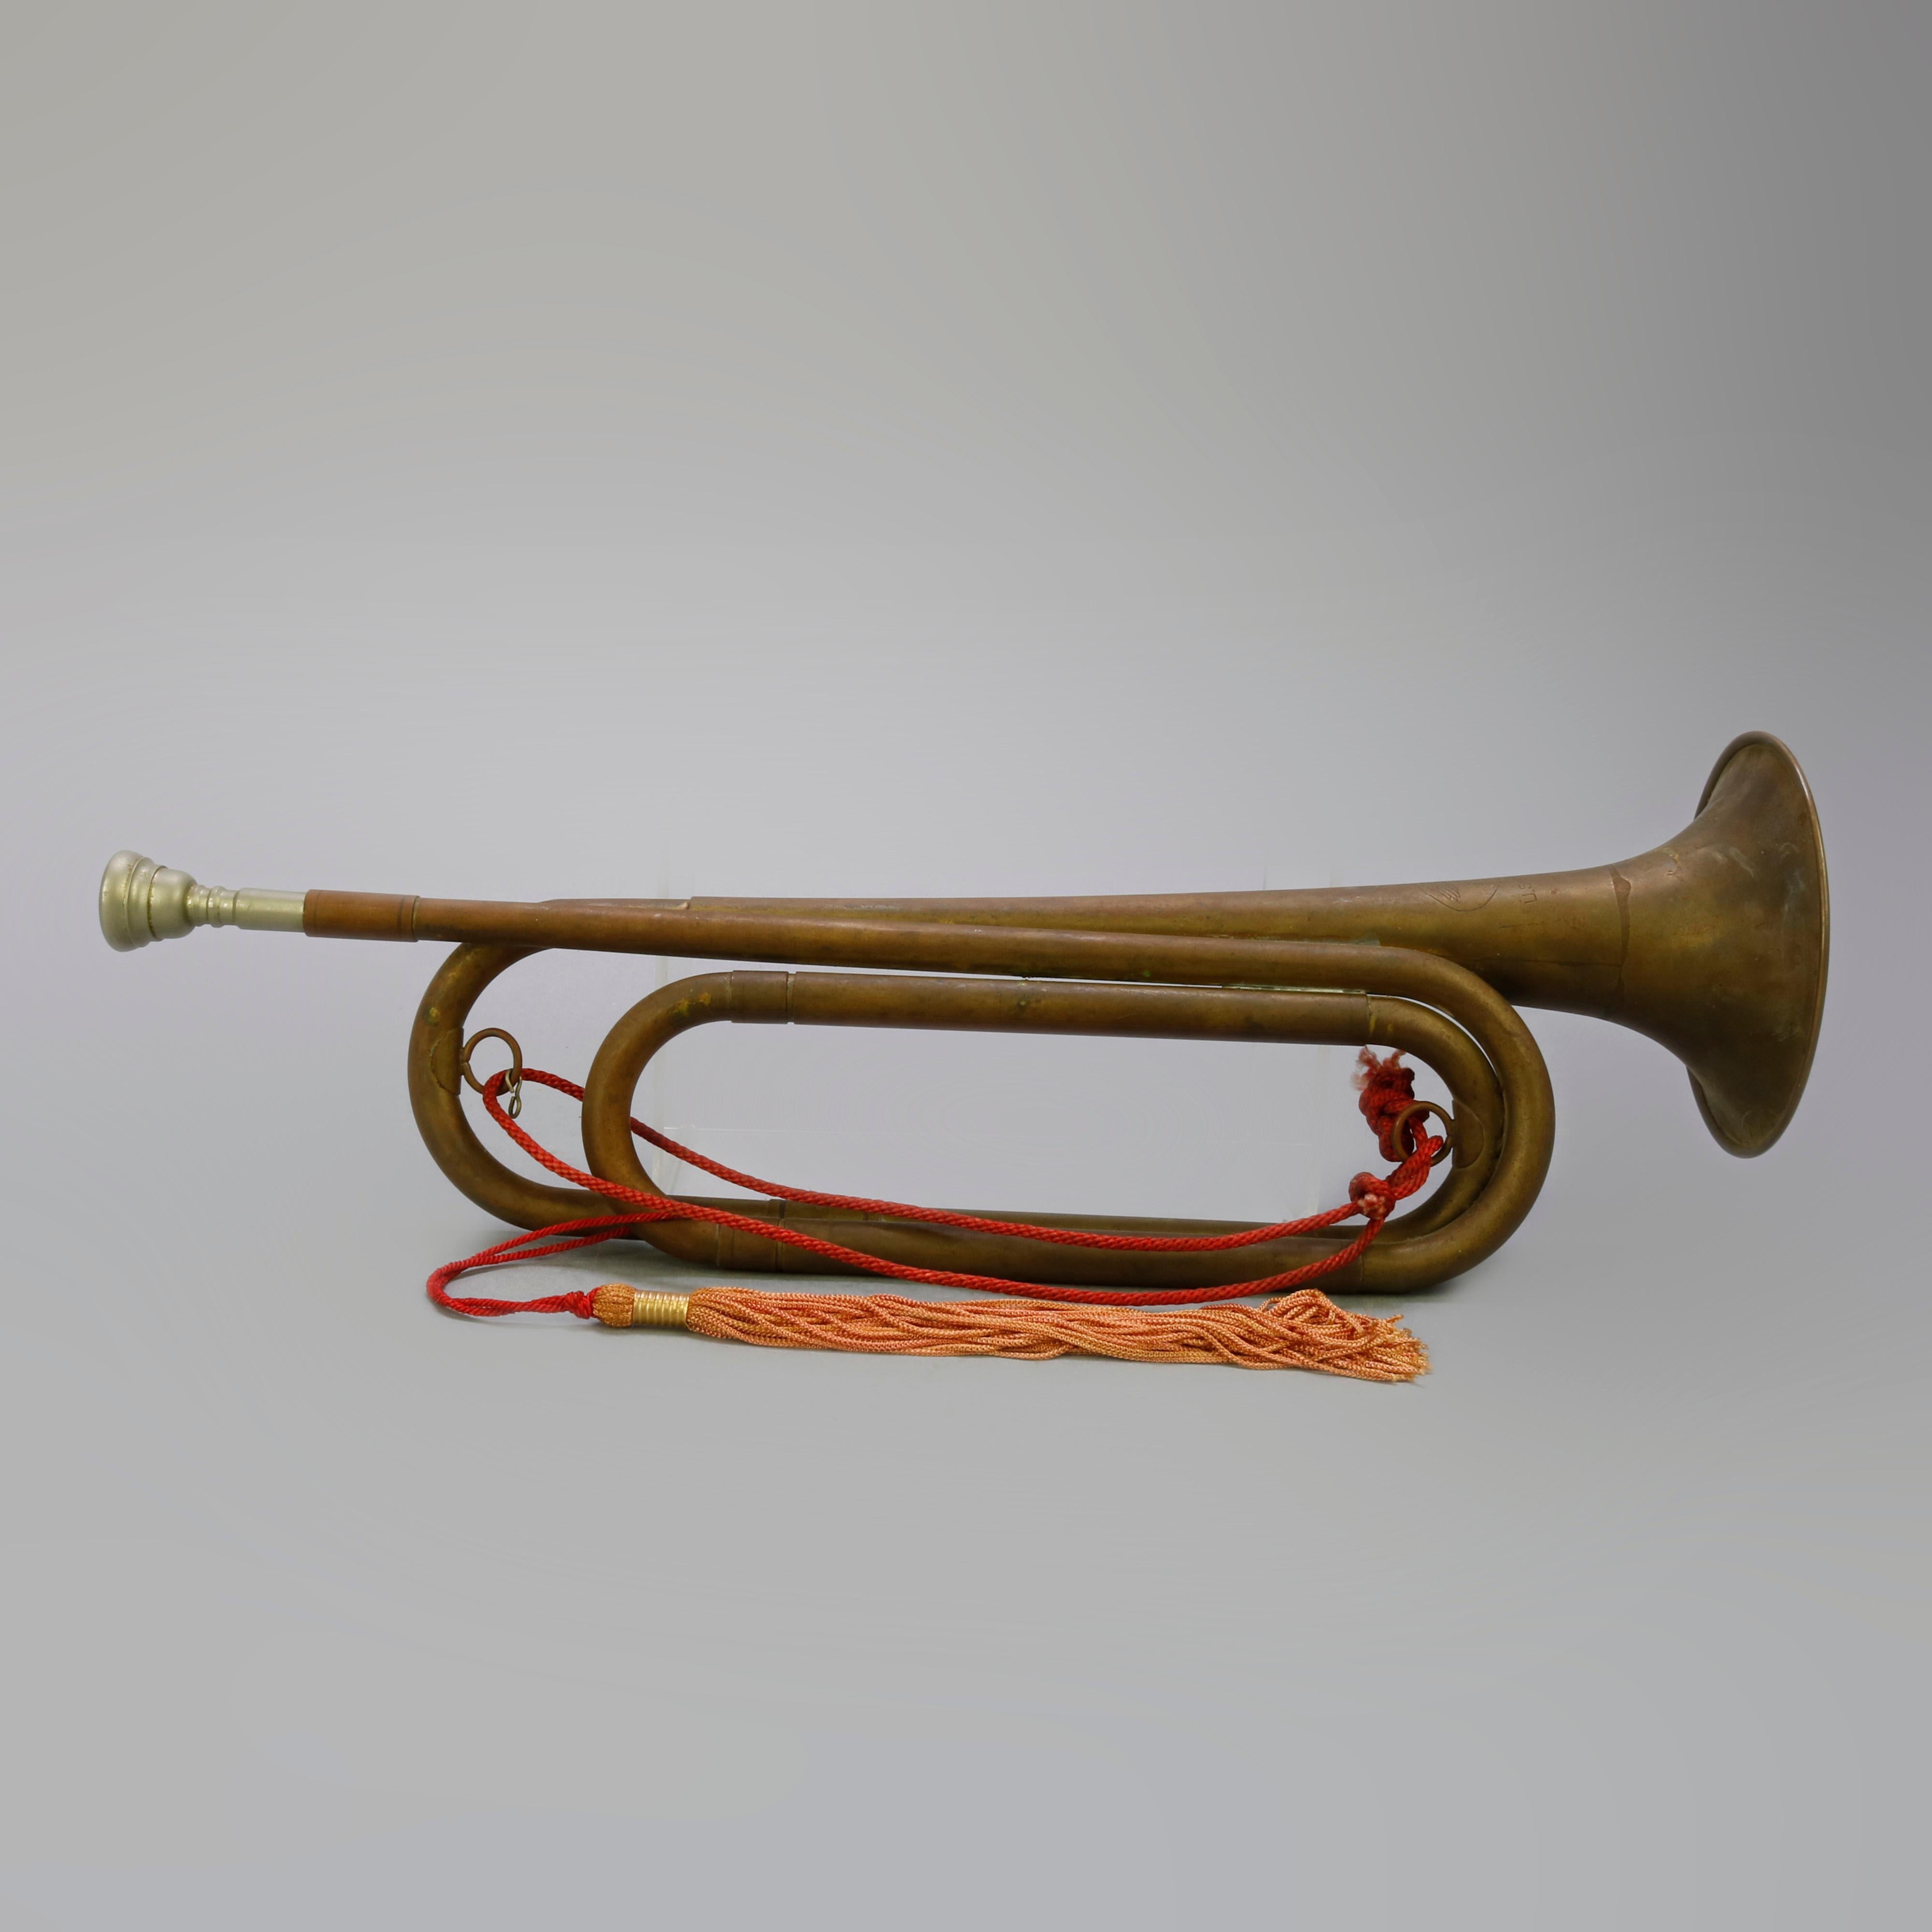 An antique Military issued brass infantry bugle with cord and tassel, 20th century

Measures- 6